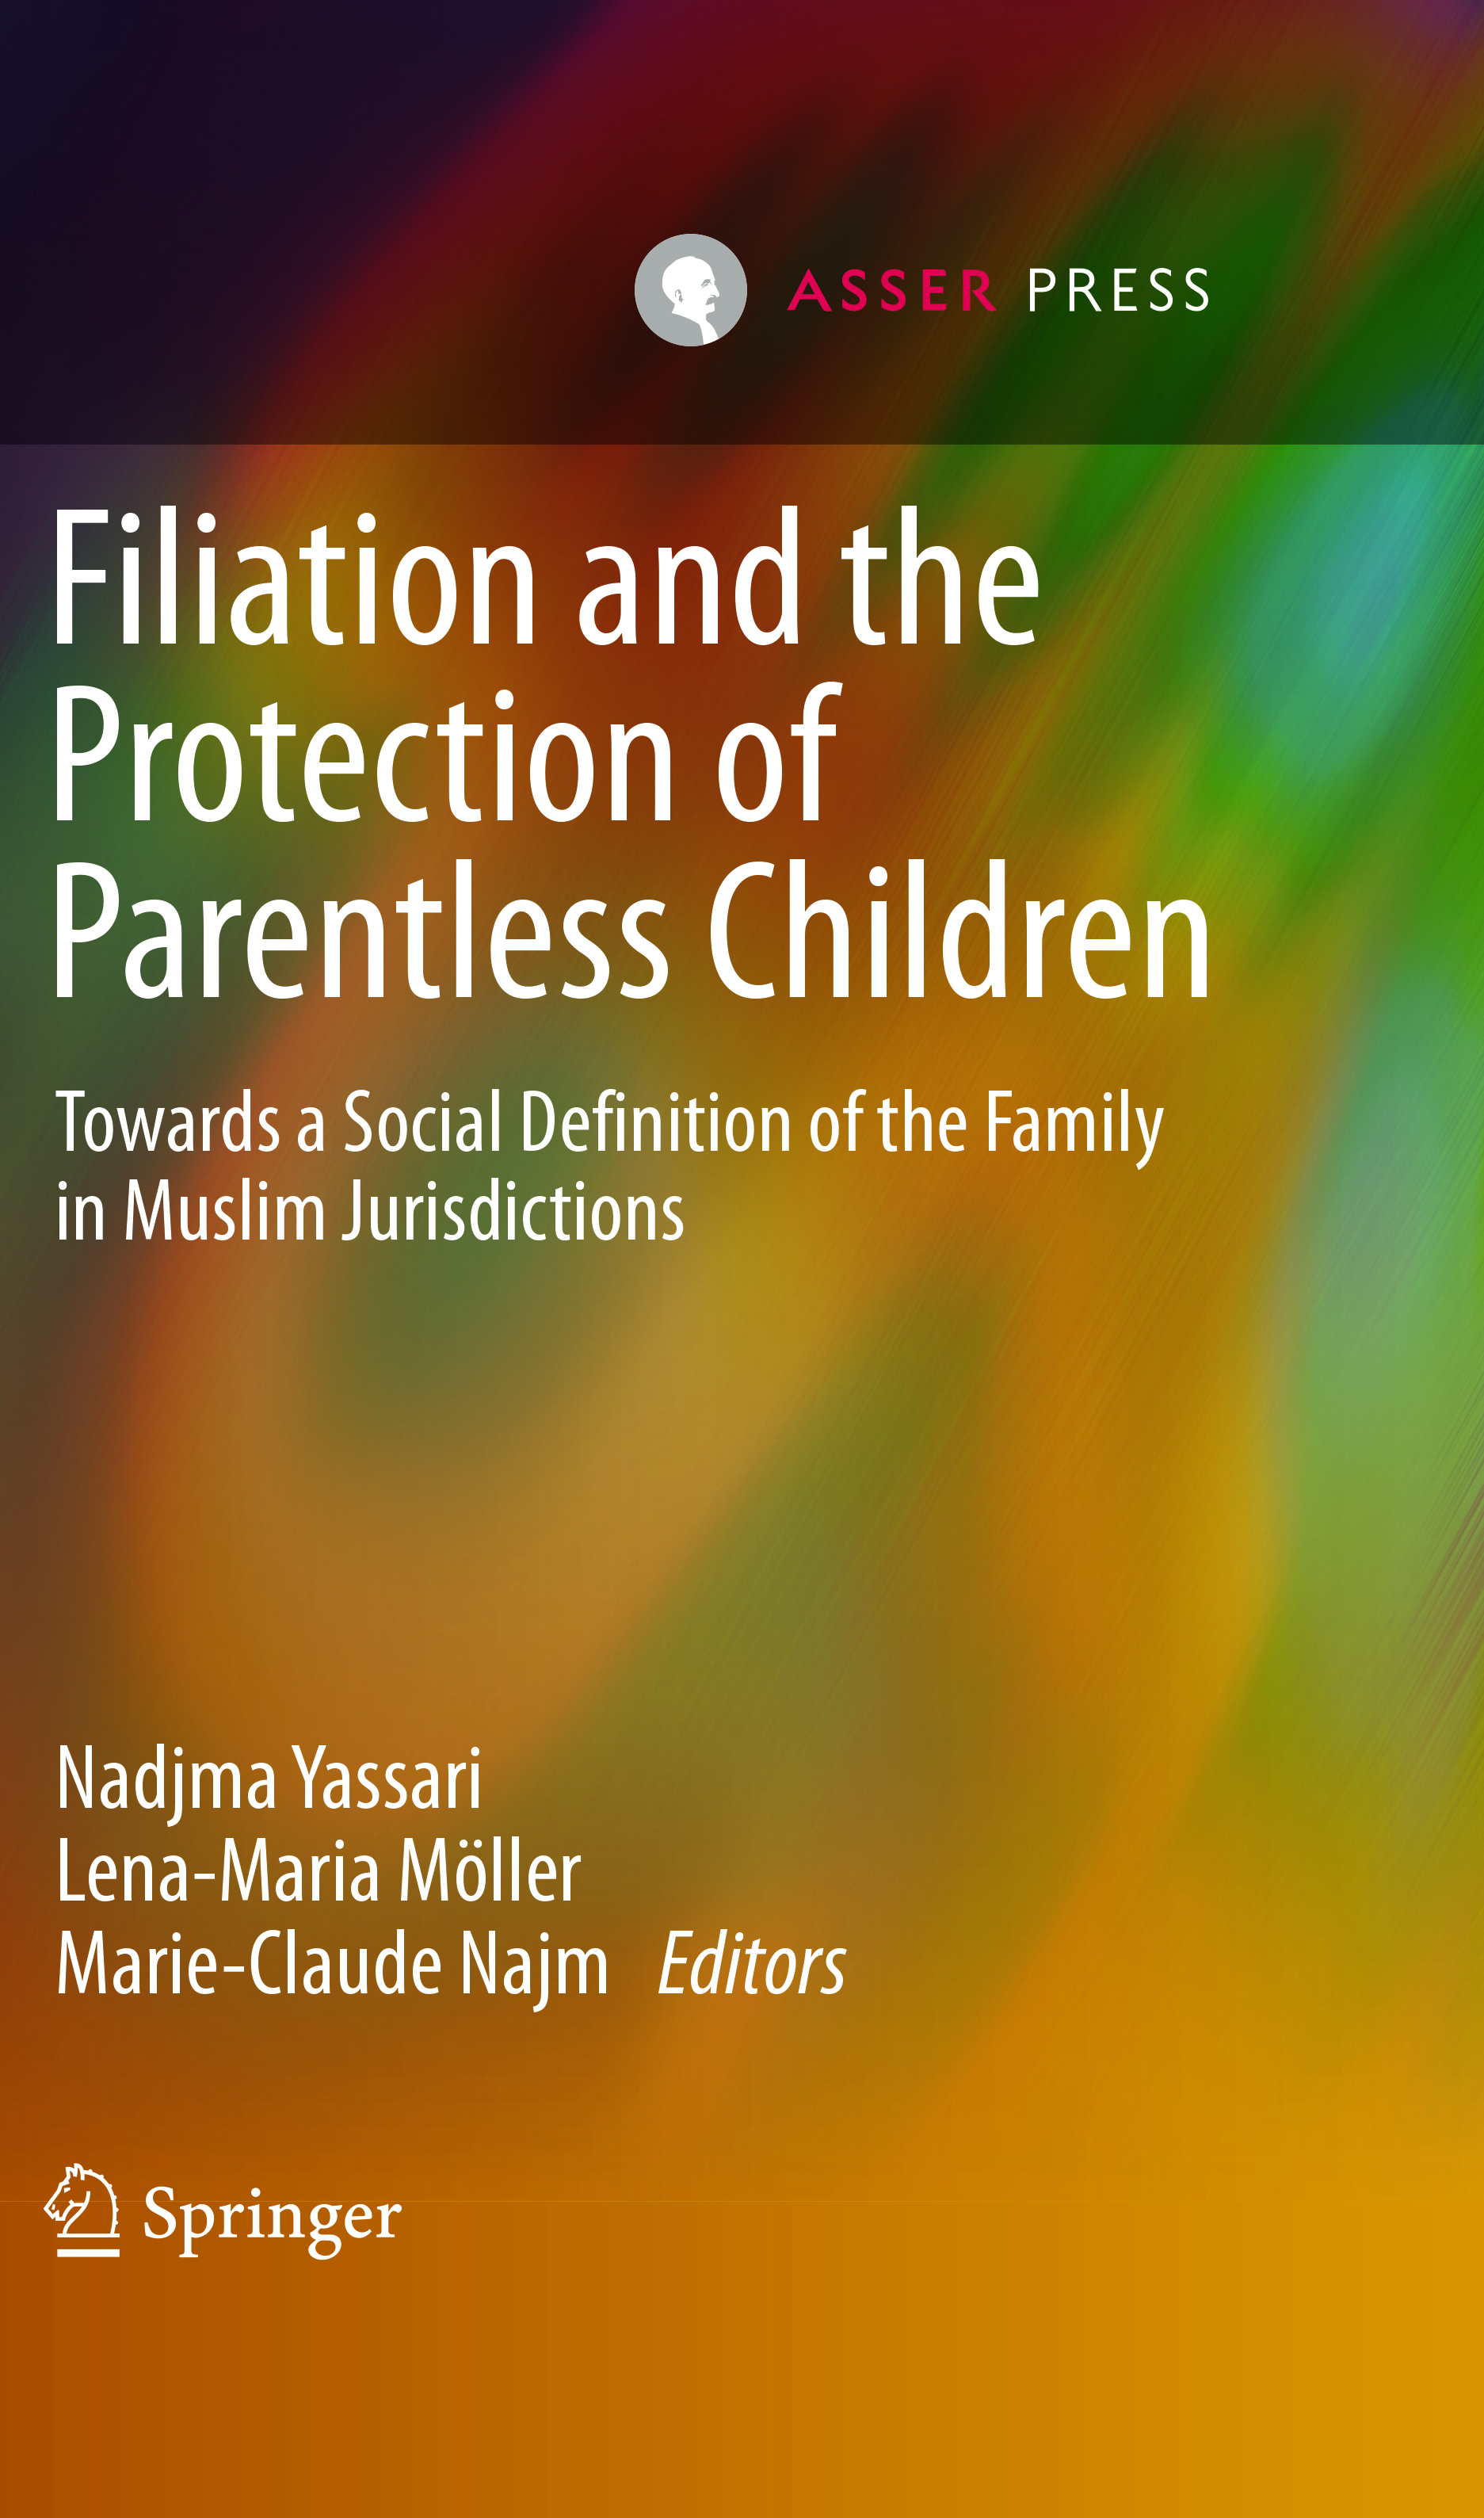 Filiation and the Protection of Parentless Children - Towards a Social Definition of the Family in Muslim Jurisdictions